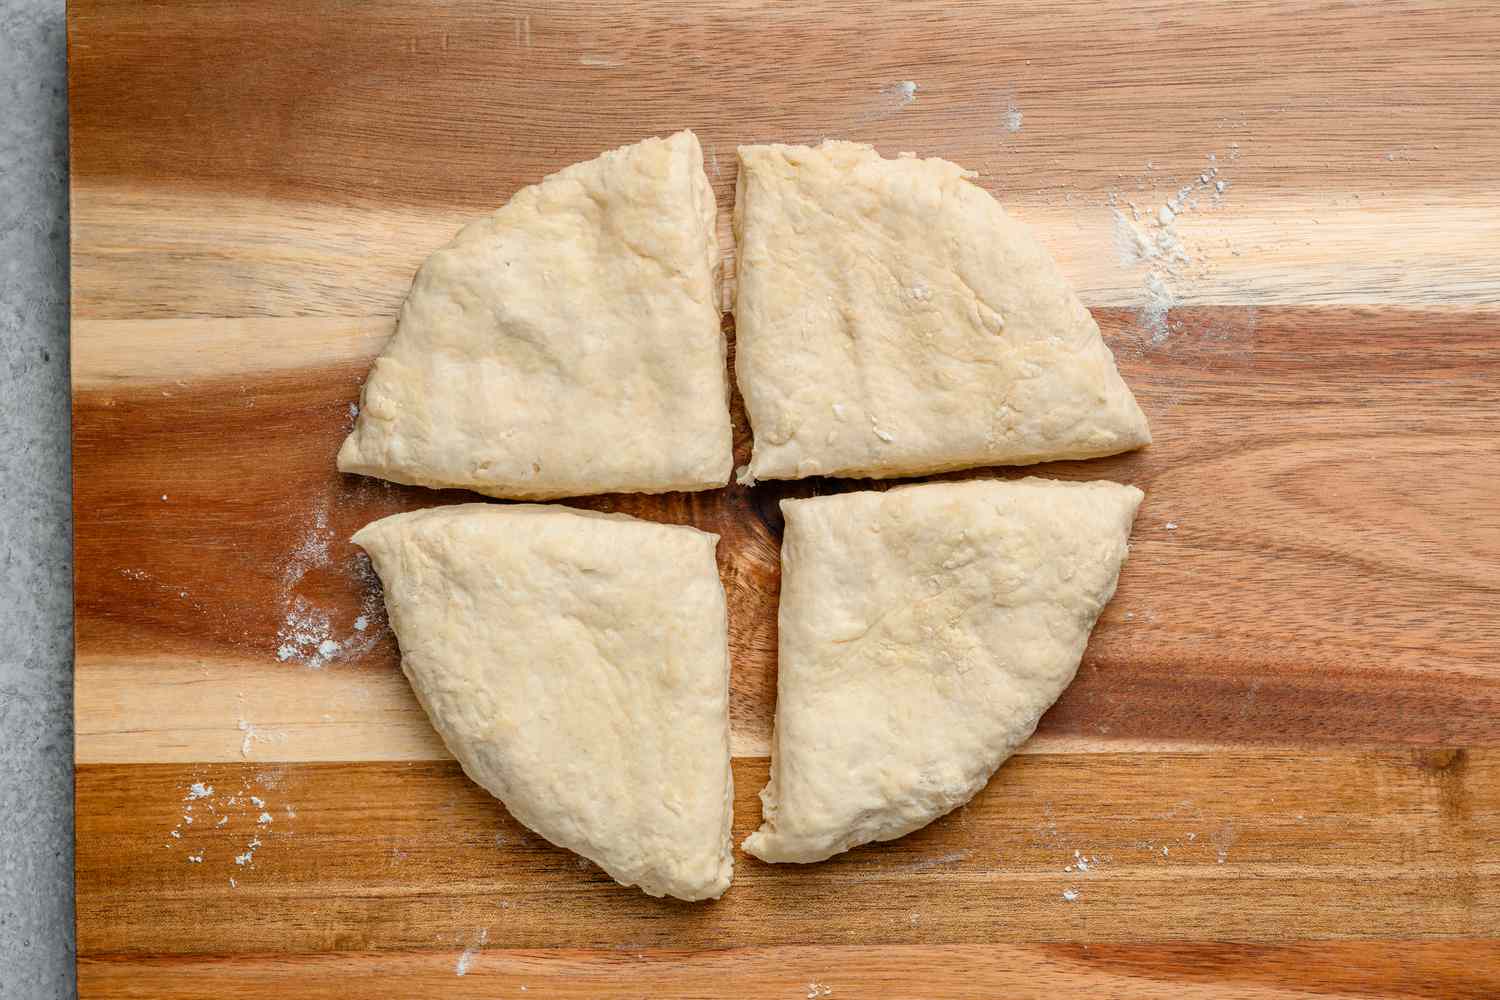 A flattened piece of round dough cut into four equal wedges